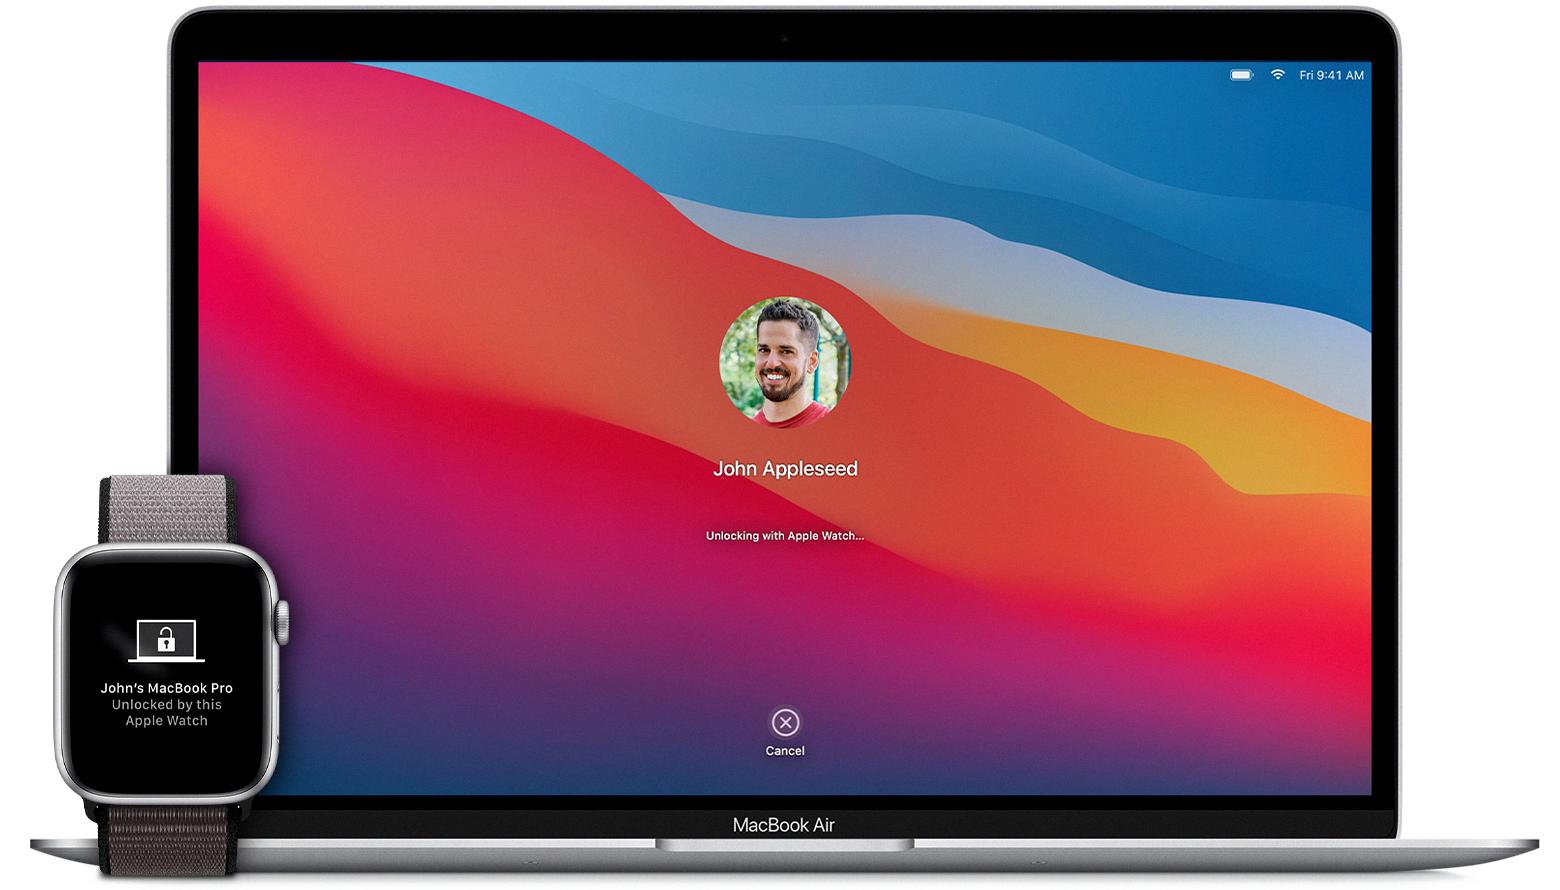 how to factory reset macbook pro without password